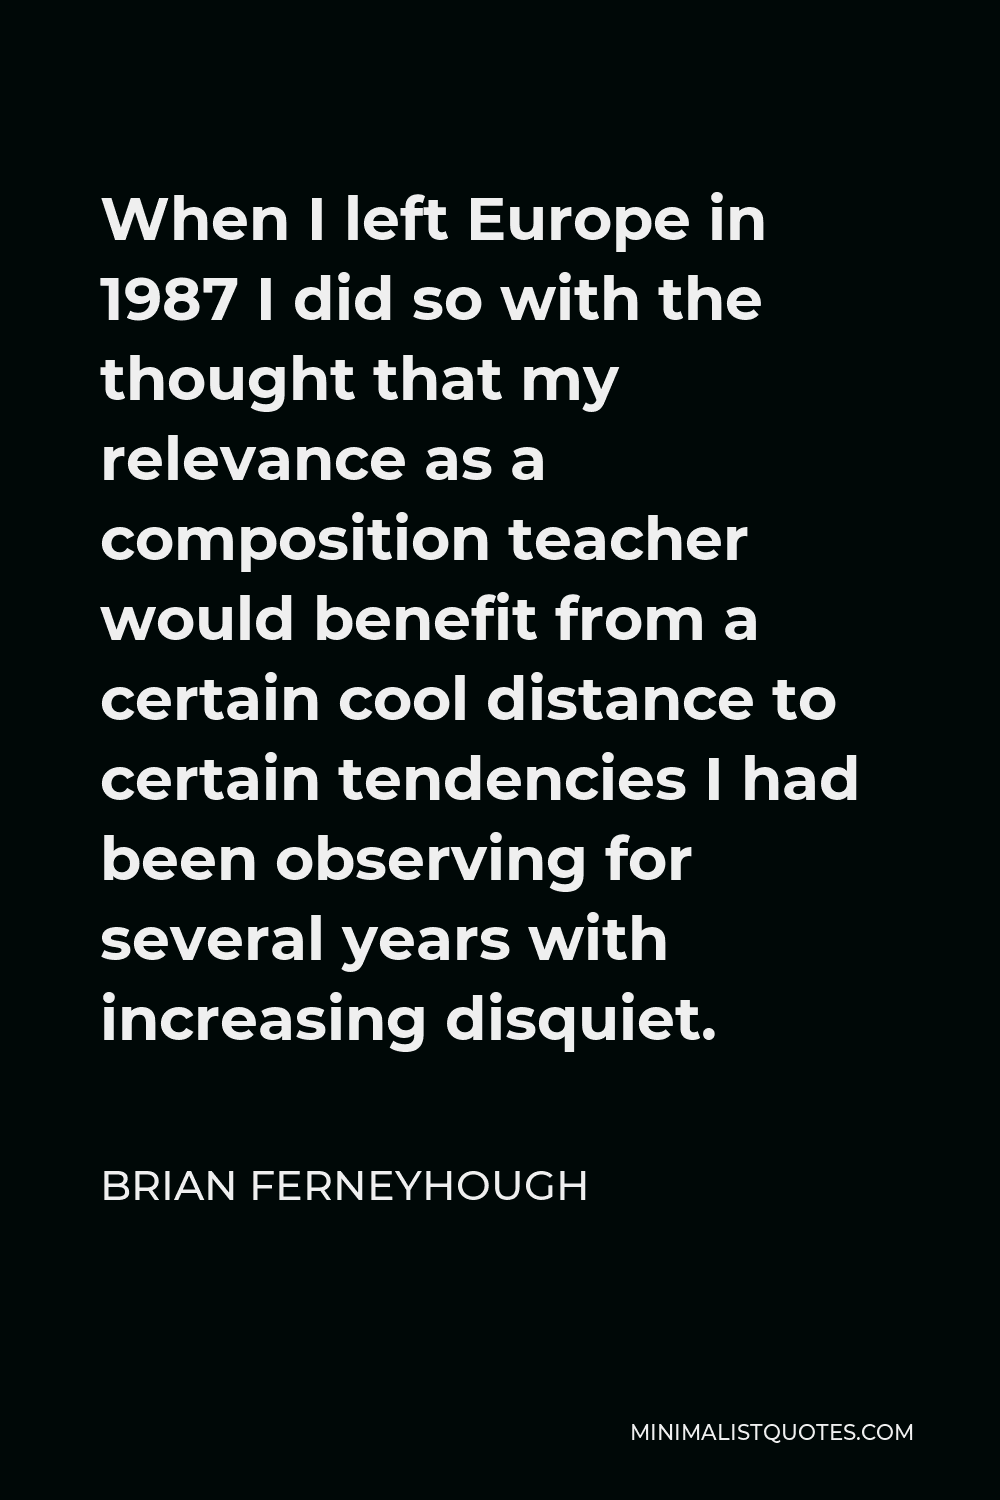 Brian Ferneyhough Quote - When I left Europe in 1987 I did so with the thought that my relevance as a composition teacher would benefit from a certain cool distance to certain tendencies I had been observing for several years with increasing disquiet.